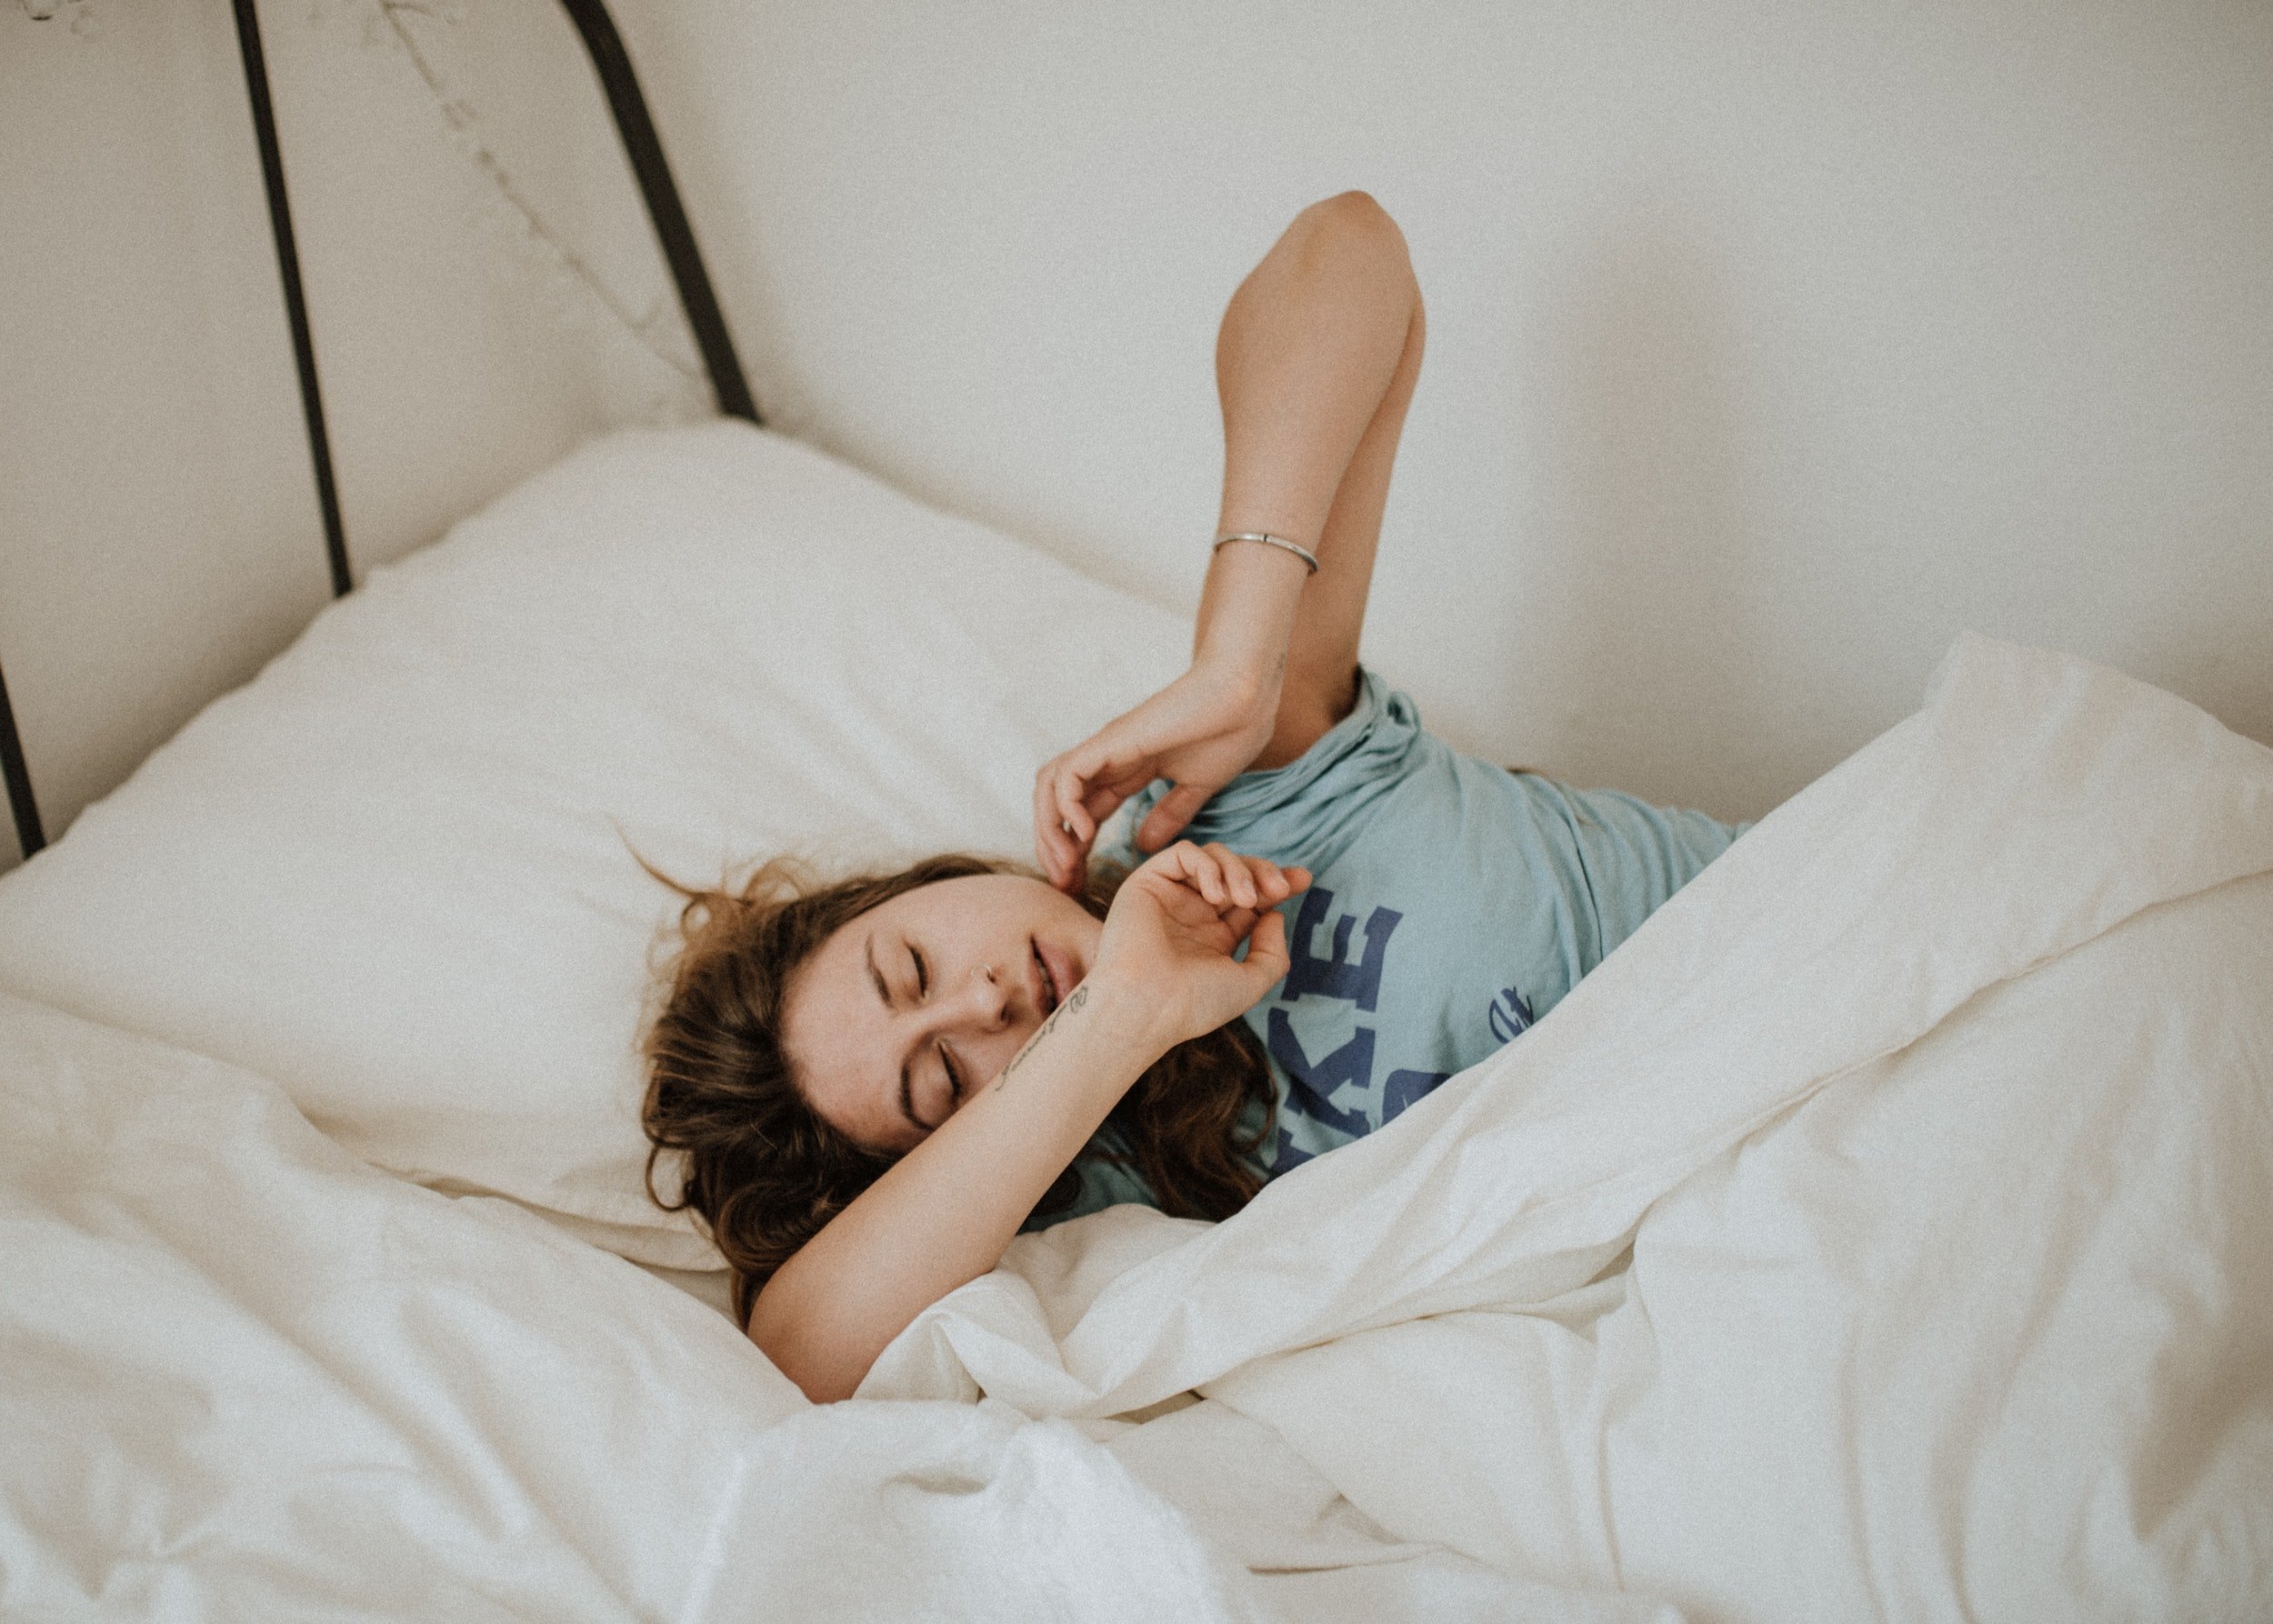 Do you live with insomnia? CBD with melatonin may be an alternative to help you get back to normal sleep.